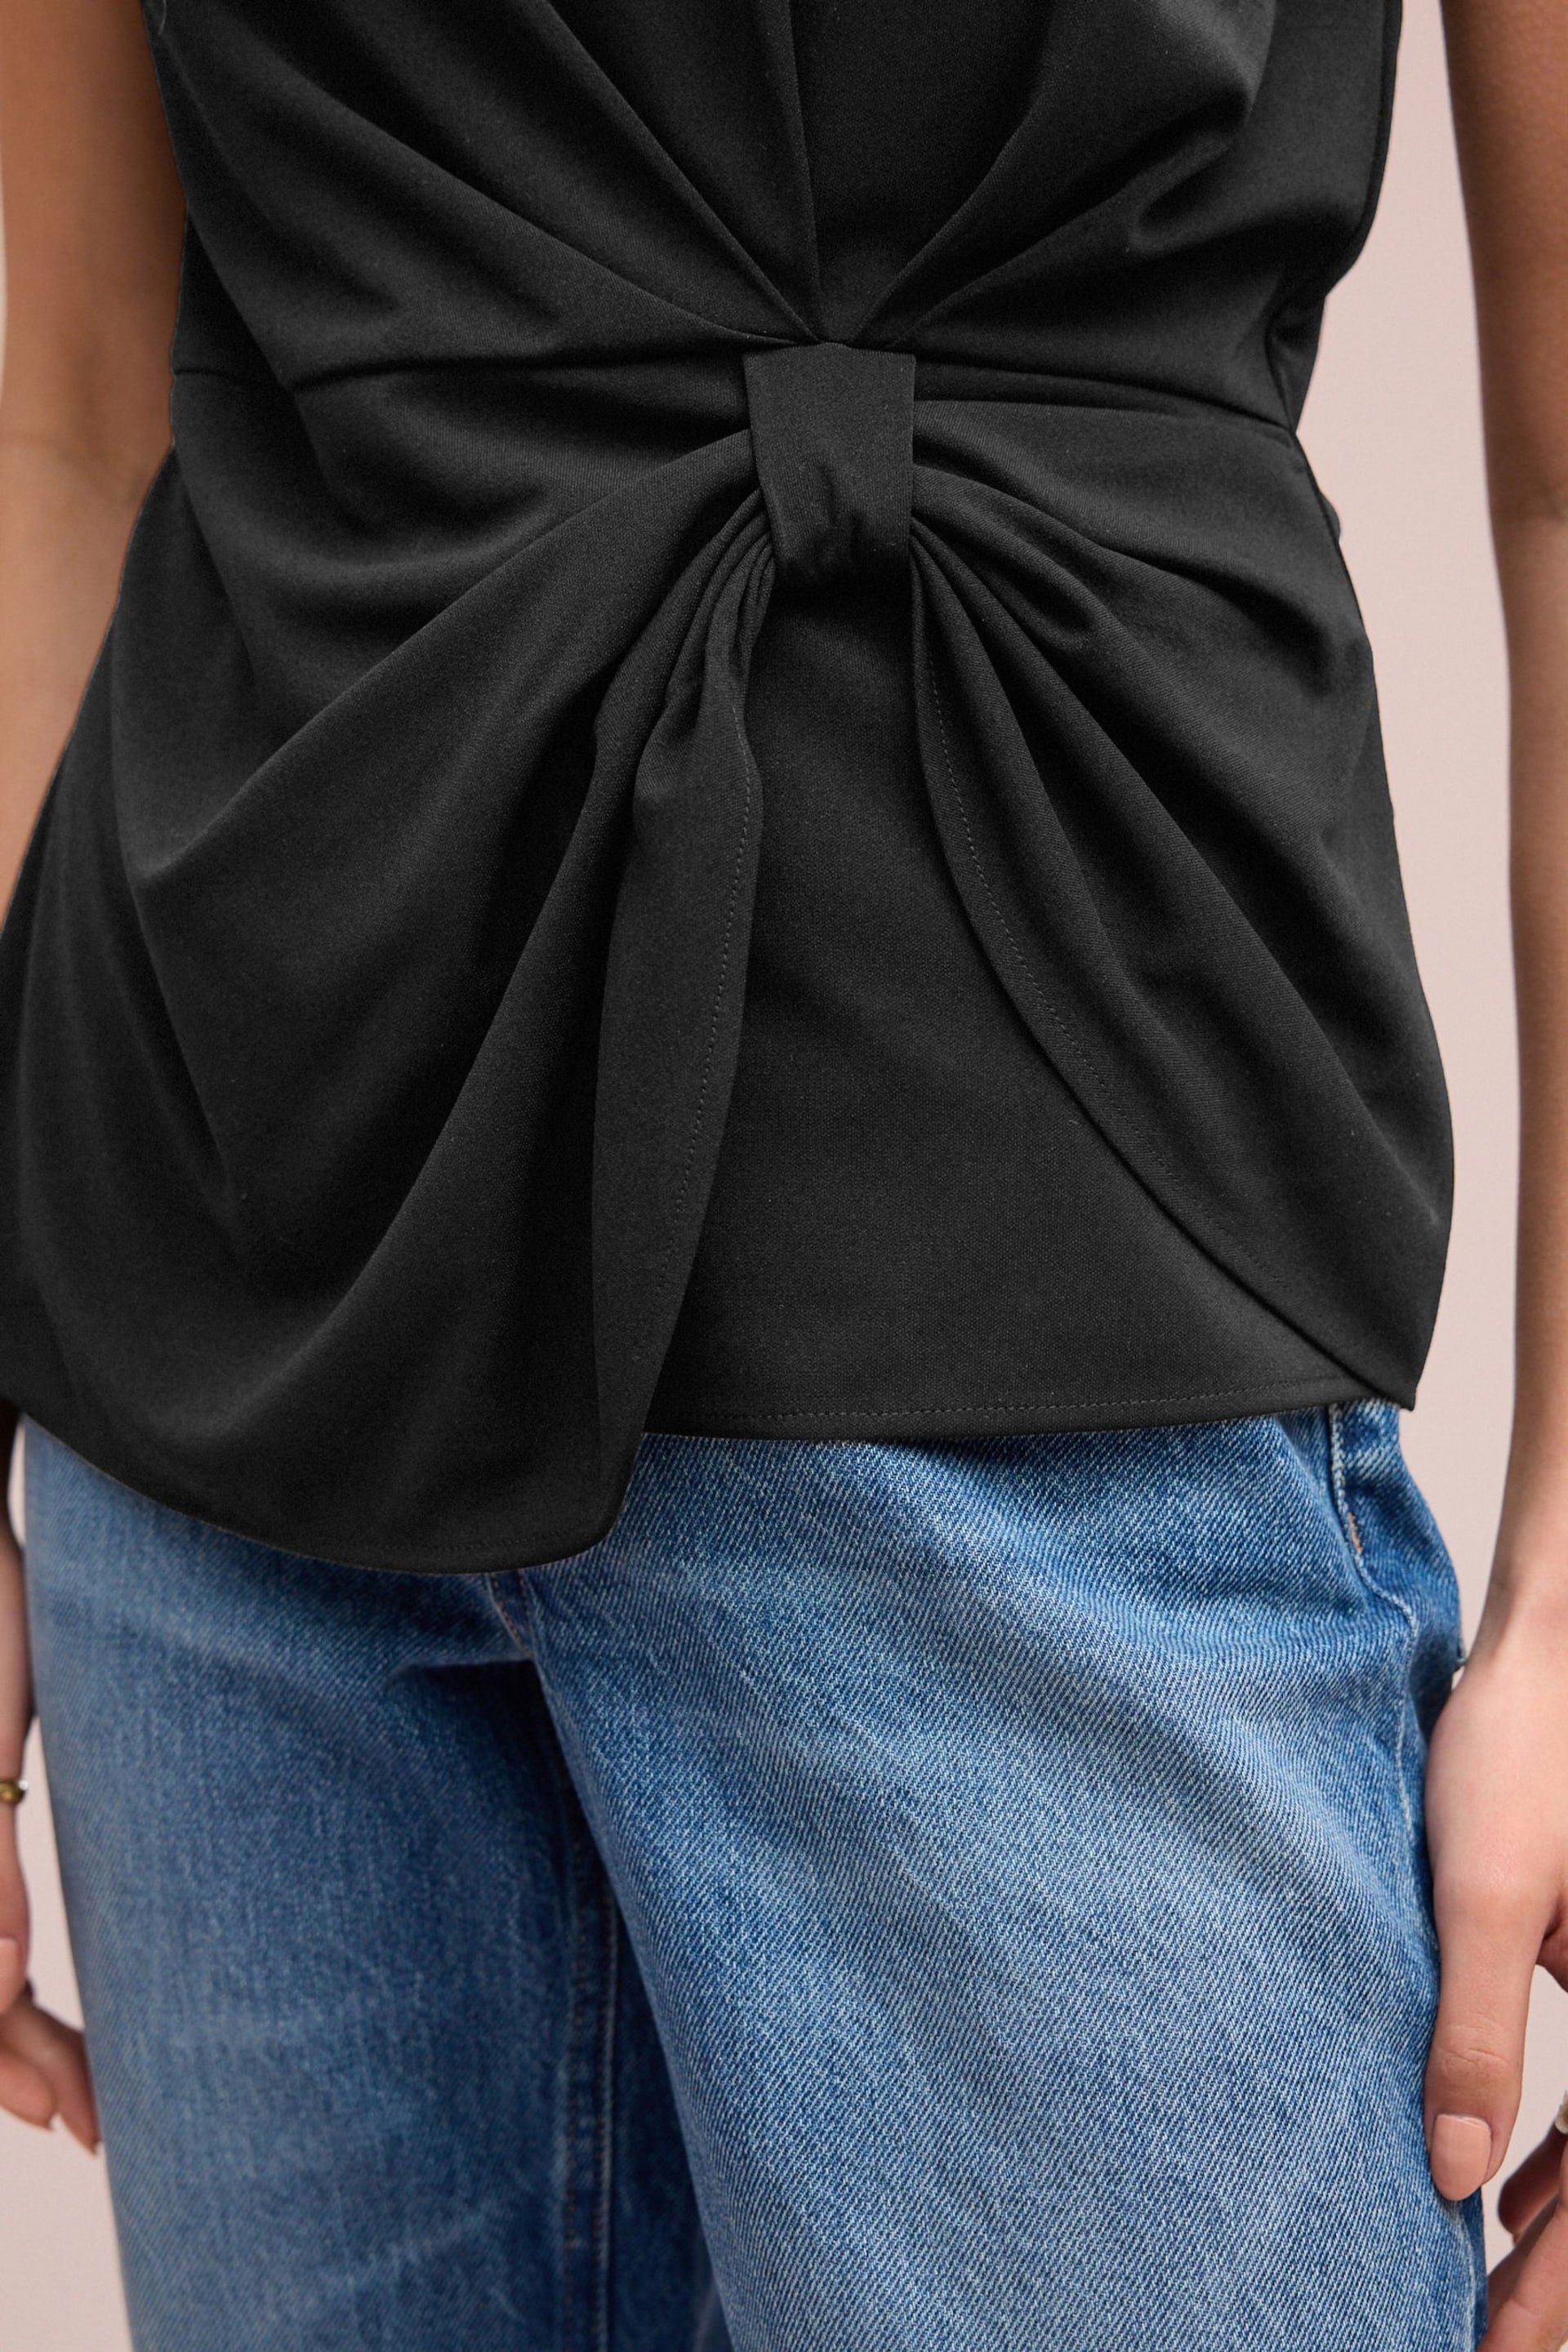 Black Bow Detail Jersey Sleeveless Top - Image 4 of 6